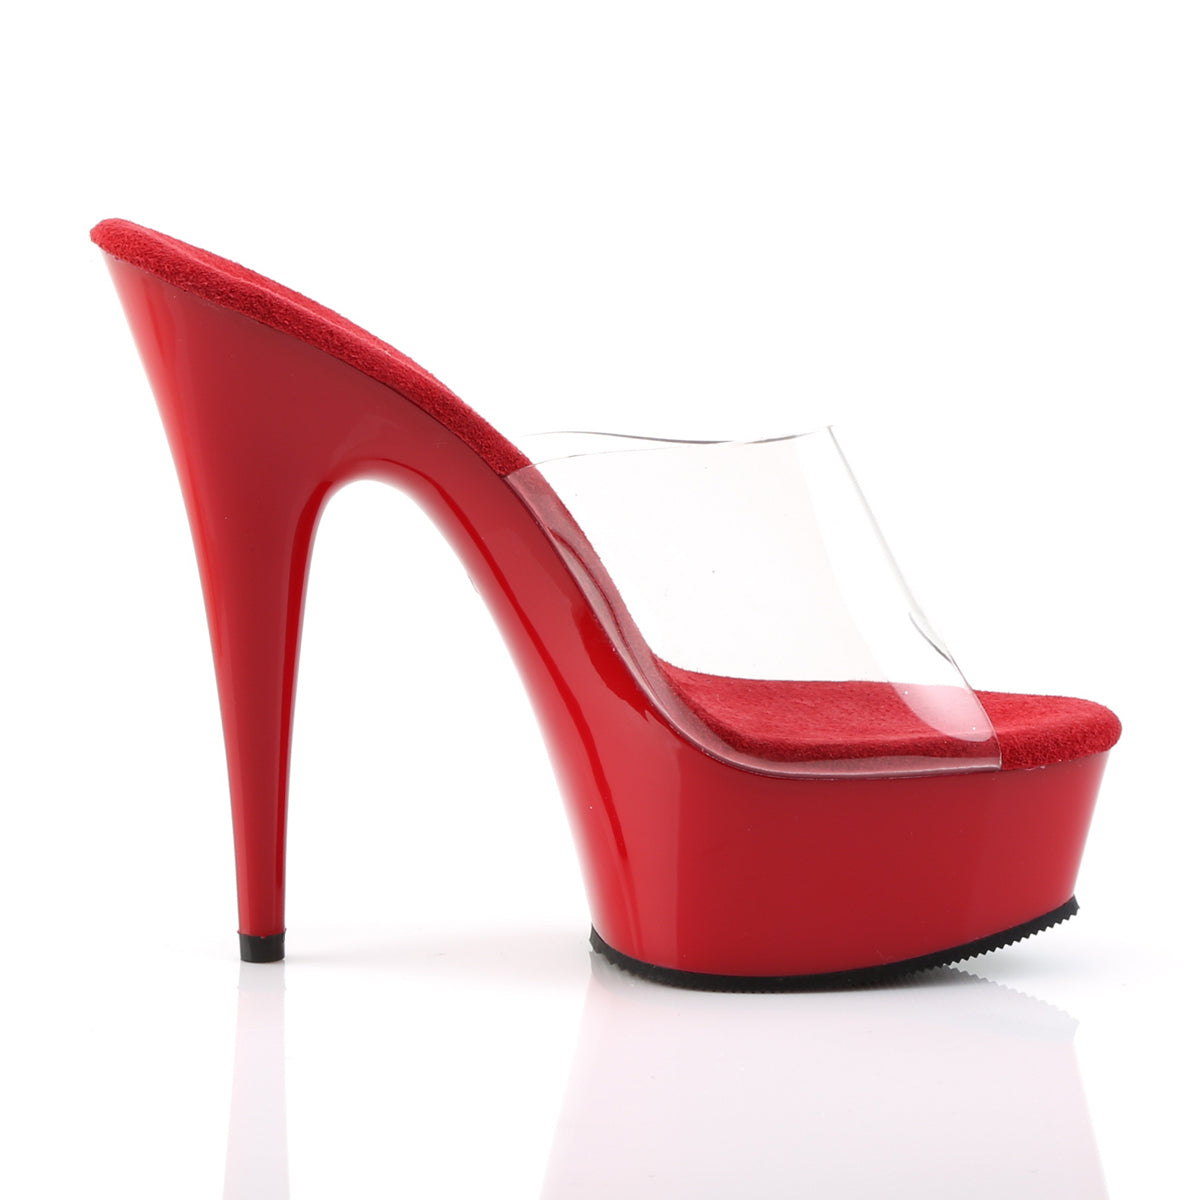 DELIGHT-601/C/R 6" PLEASER FAST DELIVERY 24-48h